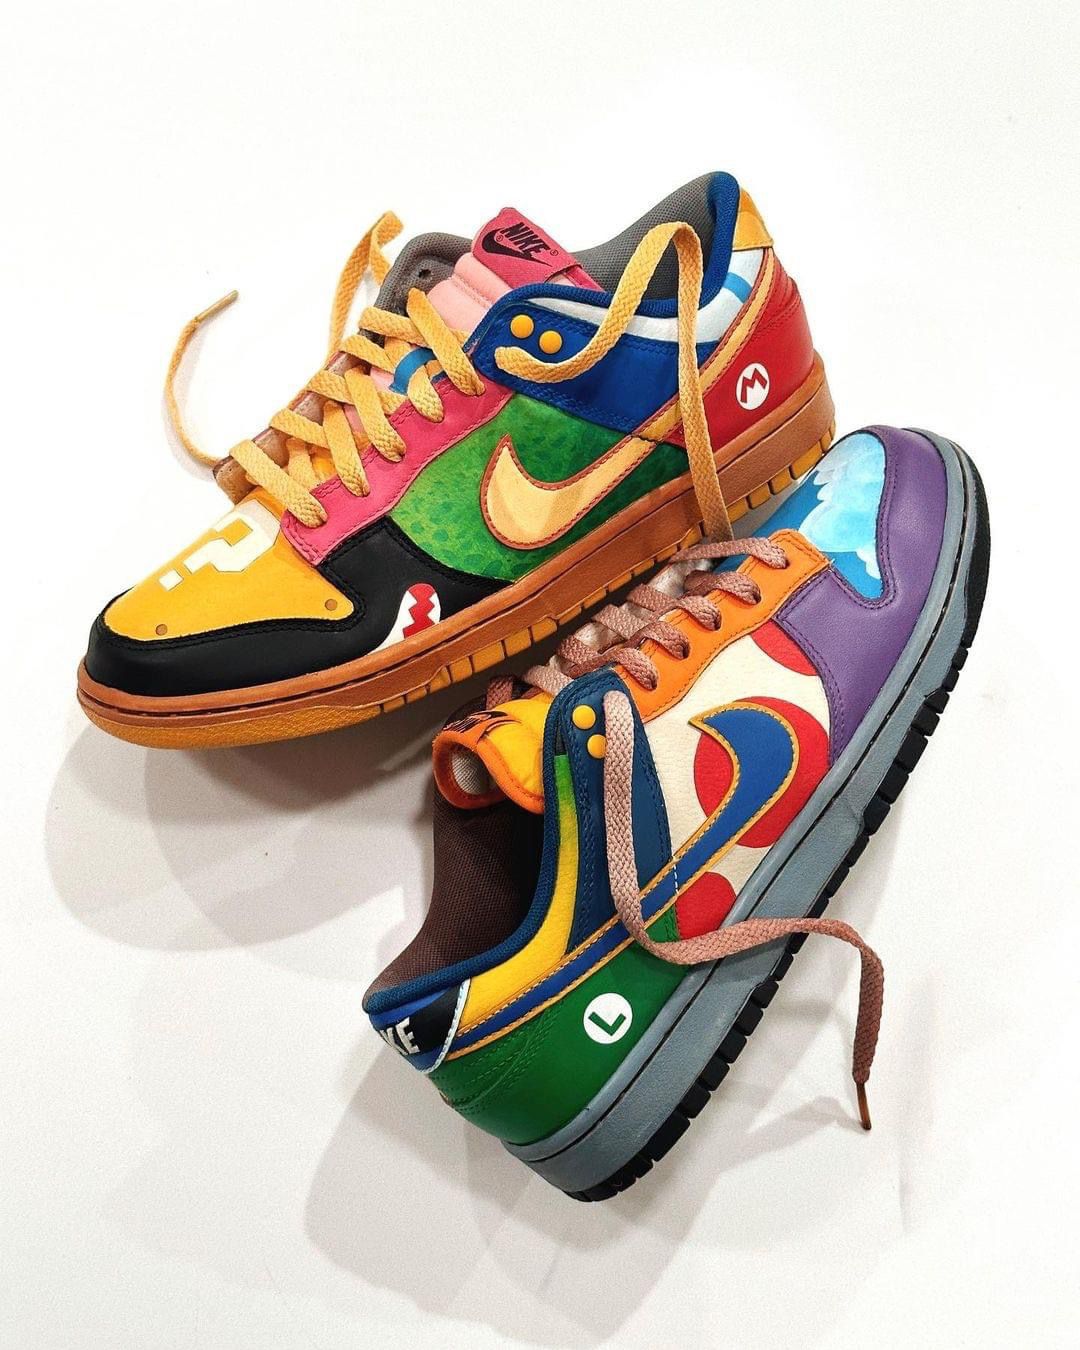 Nike Dunk Low “What the Mario” – Sneakers30 PR